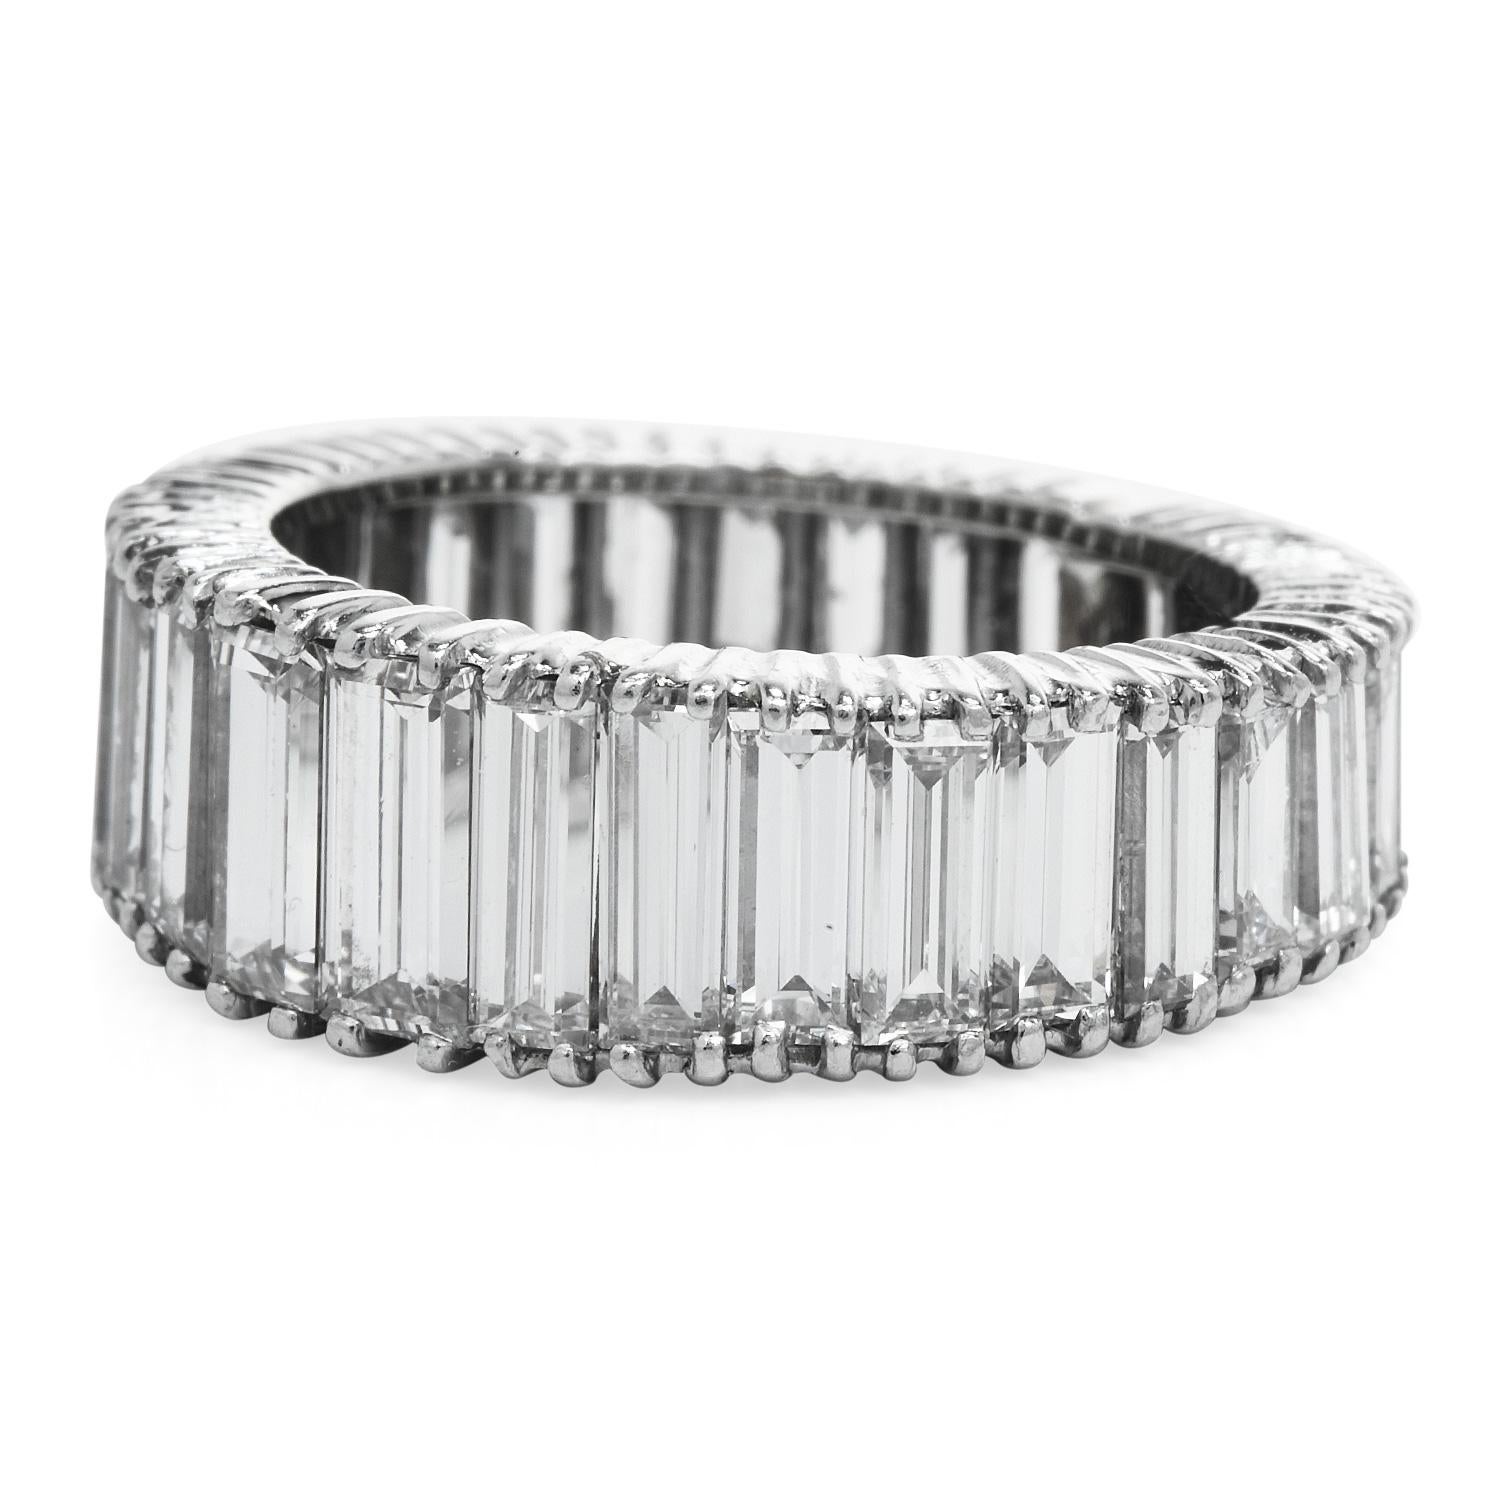 An Endless Ring of Love!

This classic Vintage 1960's diamond graduated style eternity band ring contains 30

Beautifully matched, high-quality Baguette-cut Diamonds and is crafted in Luxurious Platinum.

Measuring approx. 8 mm-5mm in width.

Thirty